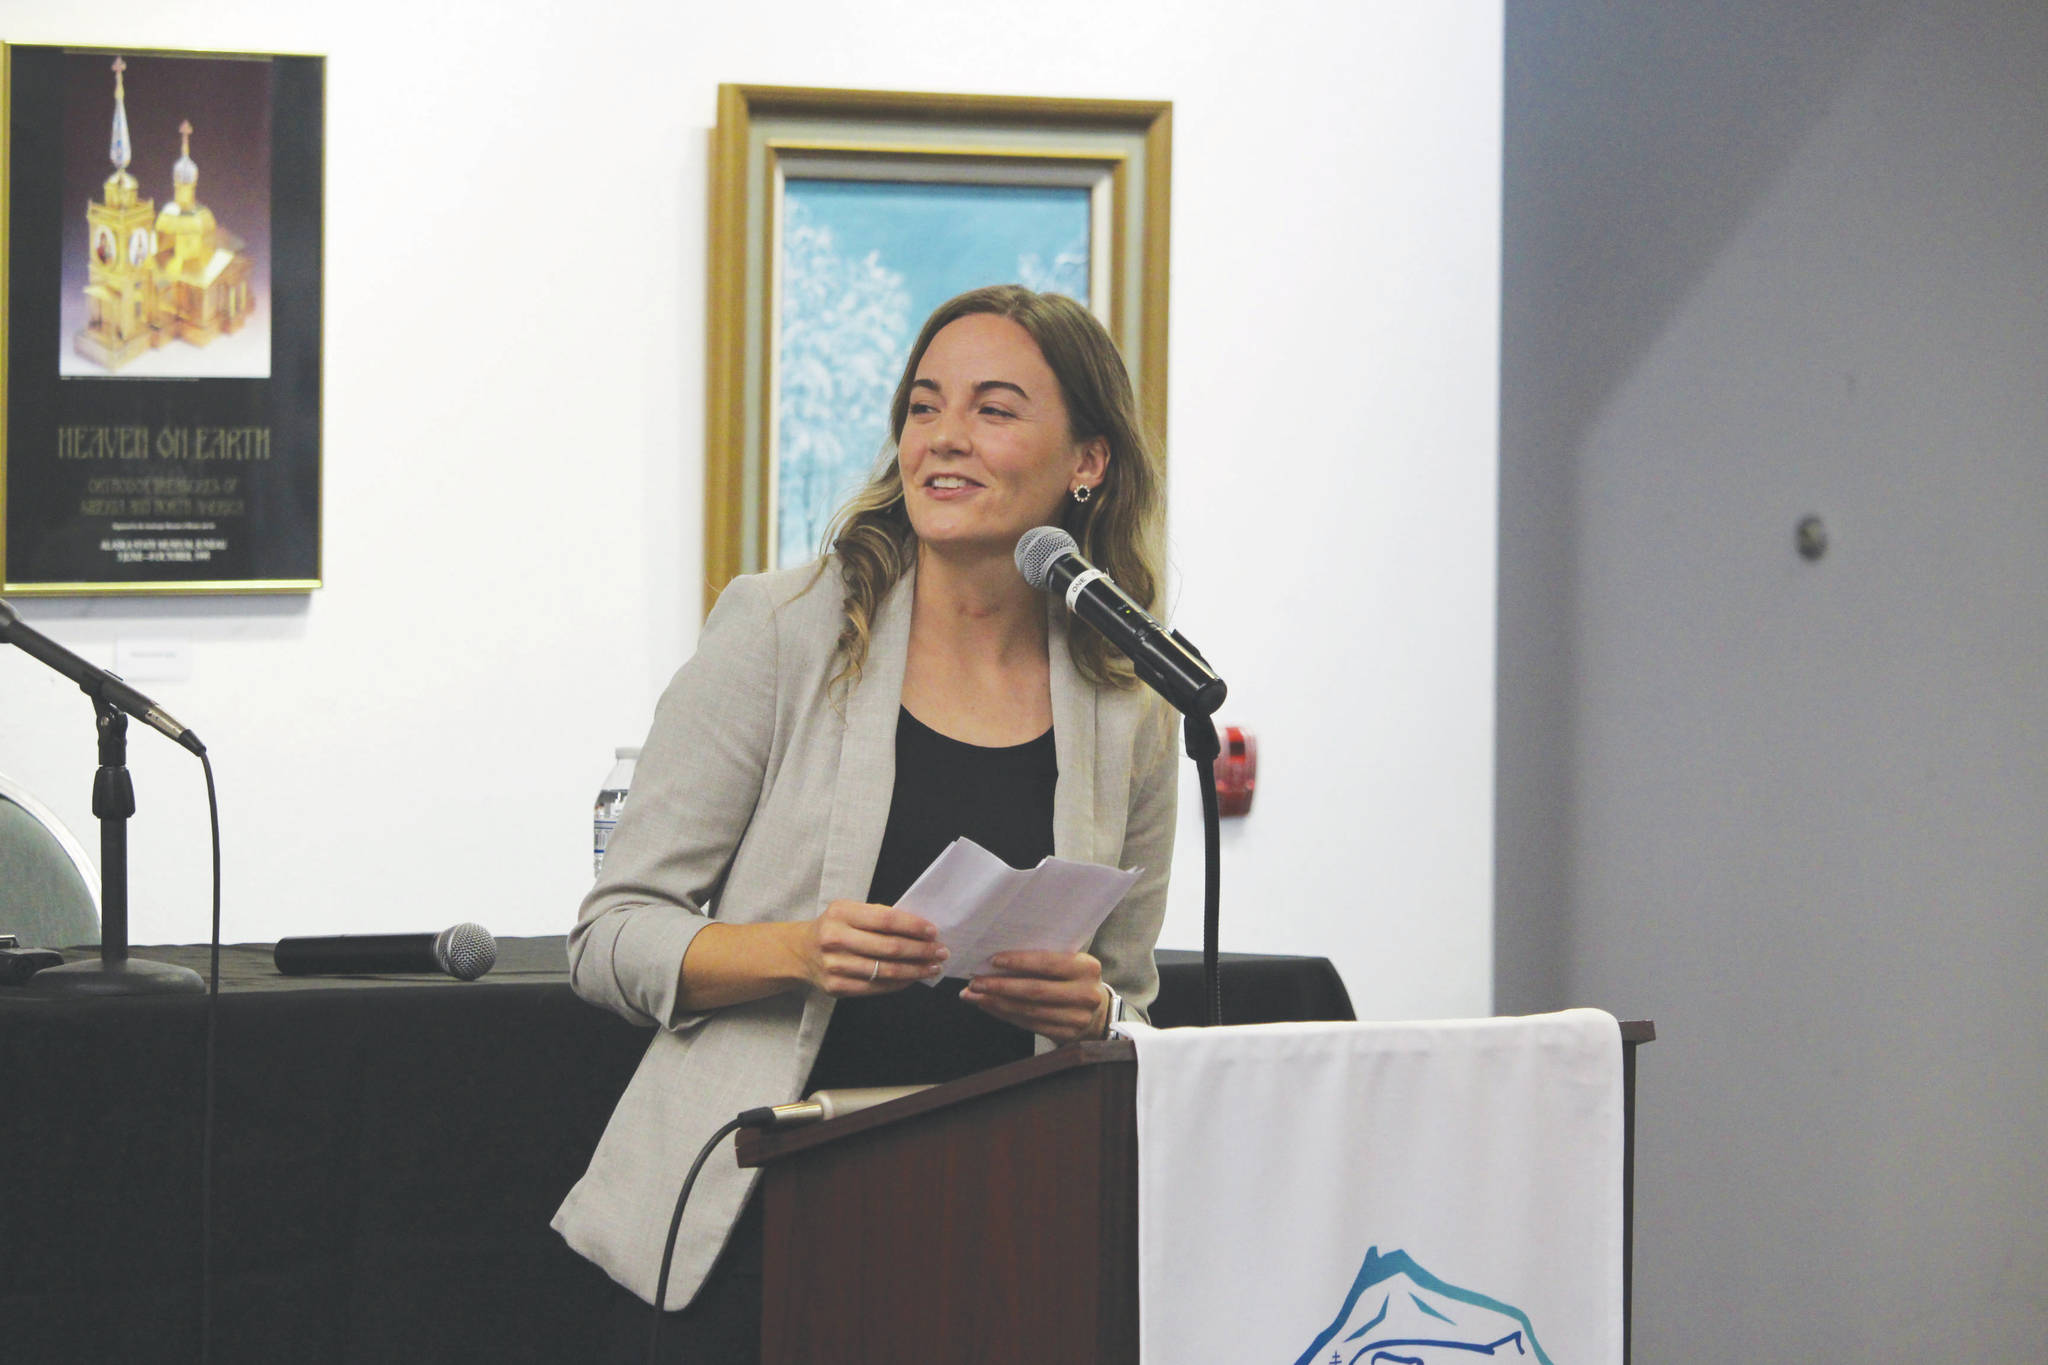 Brittany Brown, the new executive director of the Kenai Chamber of Commerce, speaks to chamber members during a Wednesday luncheon at the Kenai Visitor and Cultural Center on Wednesday, Sept. 9, 2020. (Photo by Brian Mazurek/Peninsula Clarion)